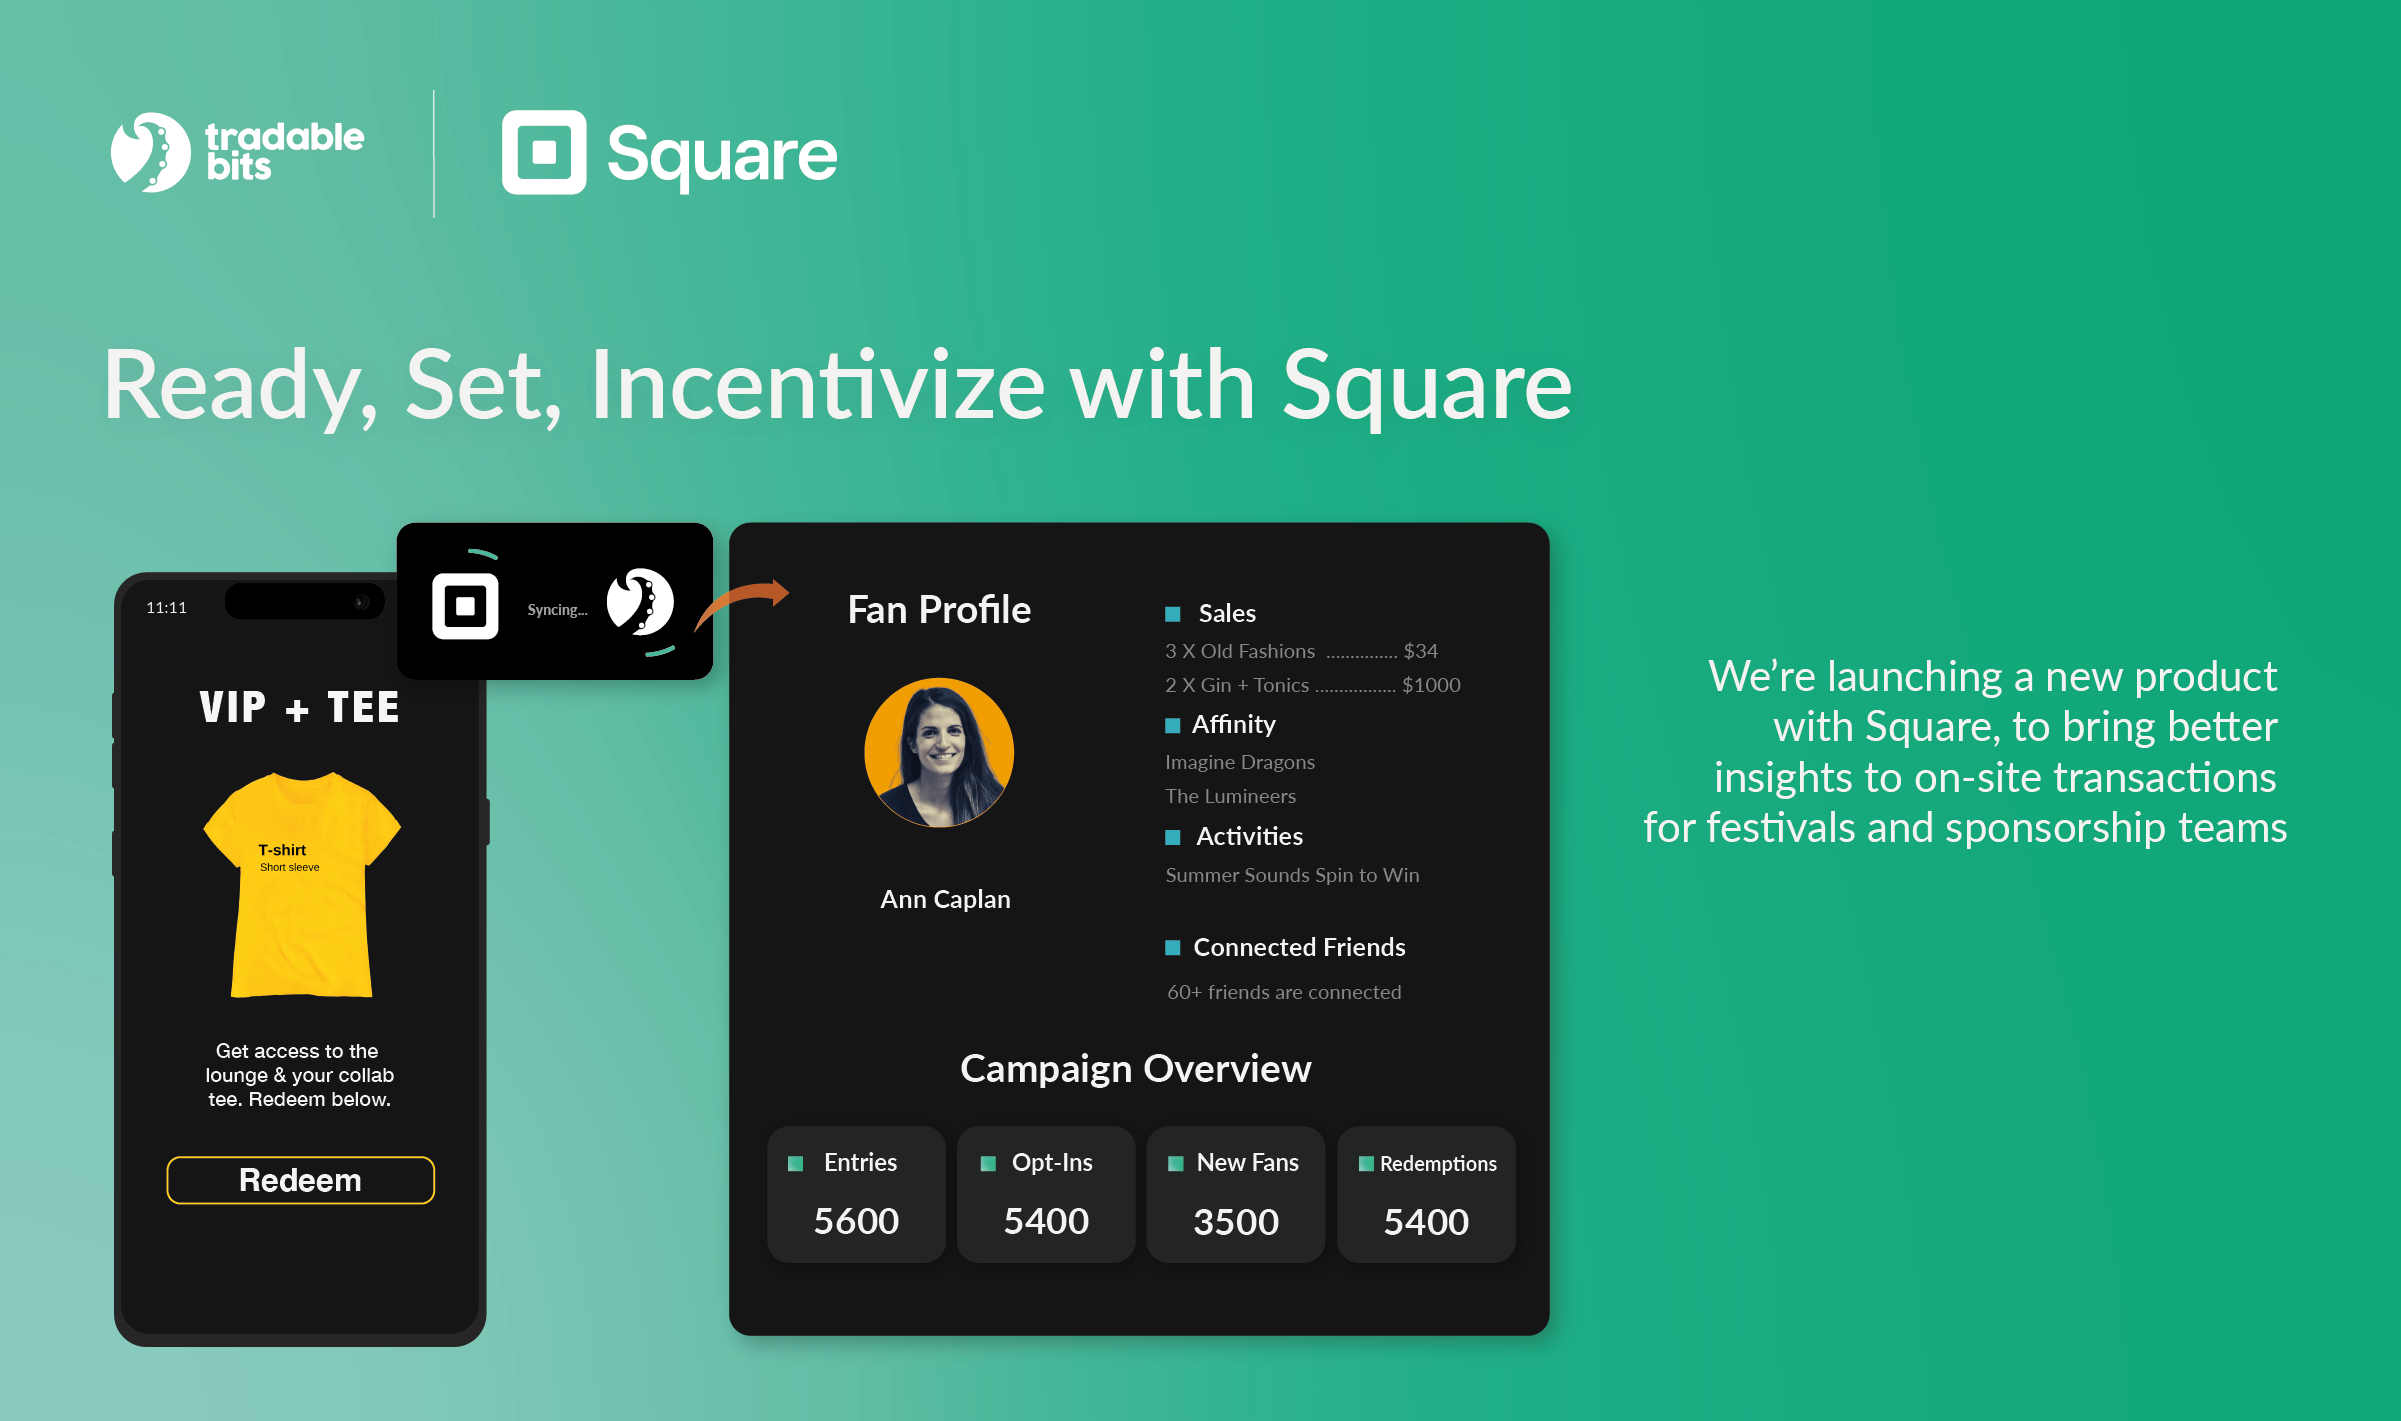 Ready, Set, Incentivize with Square